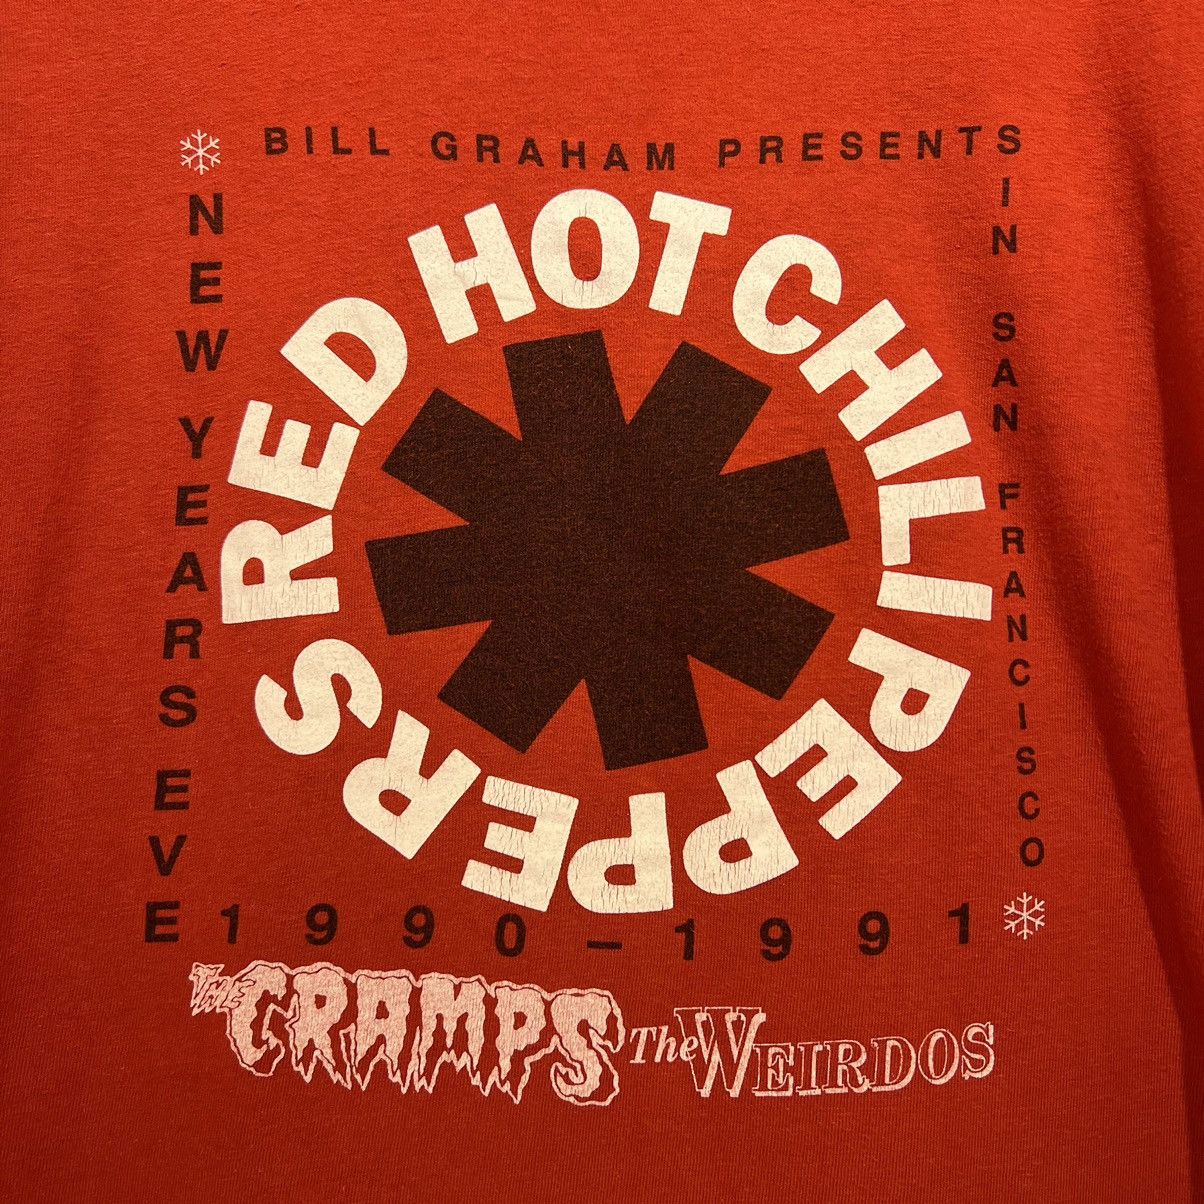 Vintage 1990 Red Hot Chili Peppers ft The Cramps & Weirdos Staff Tee Size US XL / EU 56 / 4 - 3 Thumbnail